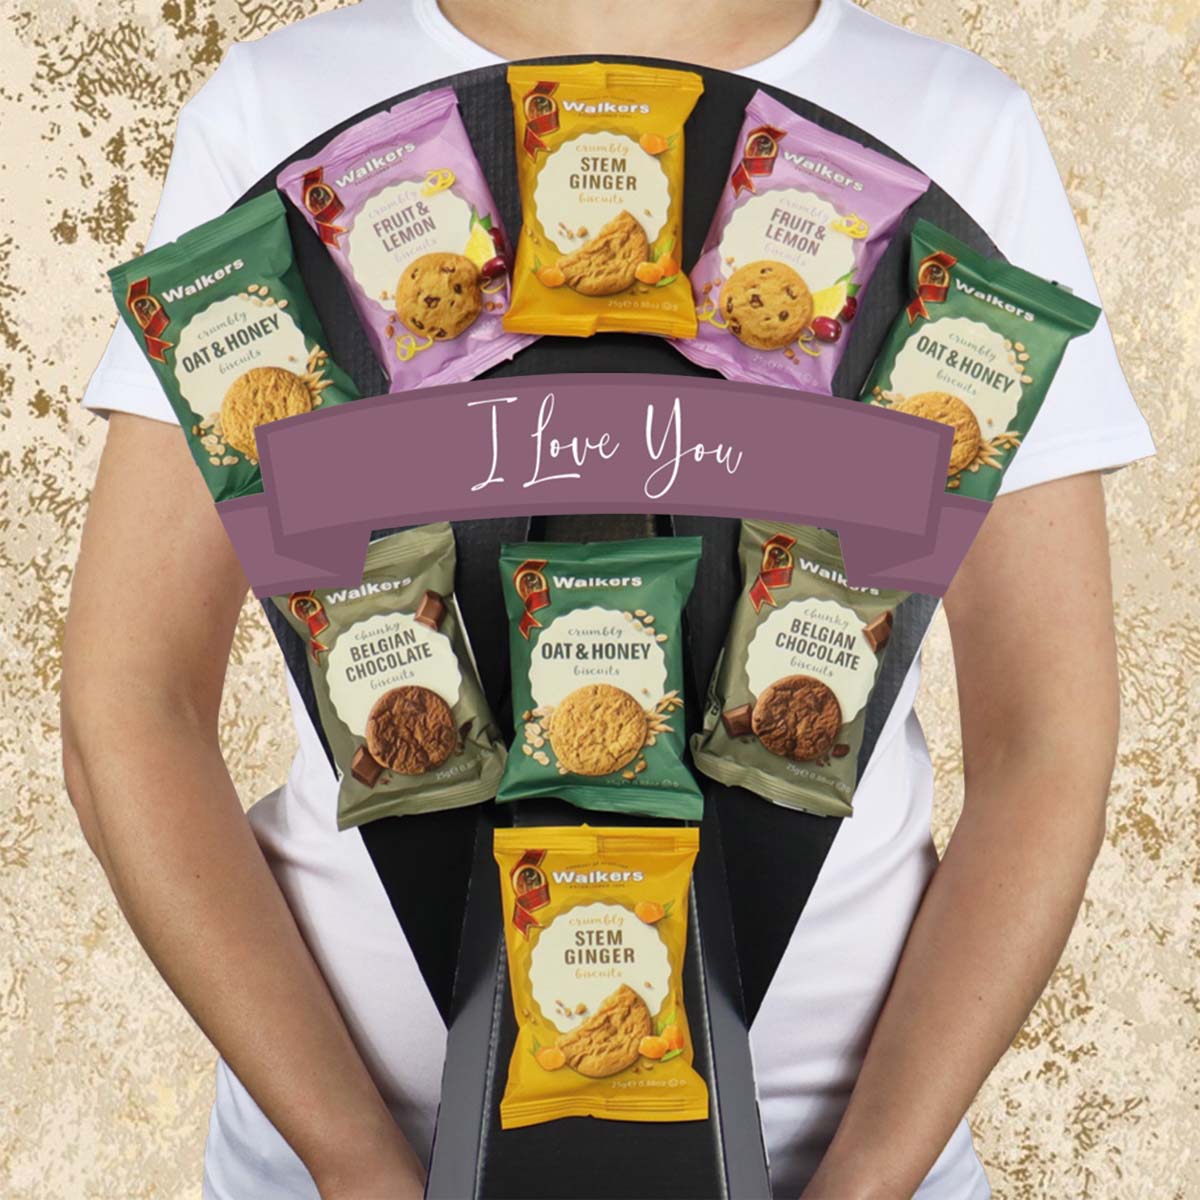 The Border Biscuit I Love You Bouquet with Butterscotch Crunch, Chocolate Cookies, Viennese Whirls and More - Gift Hamper Box by HamperWell